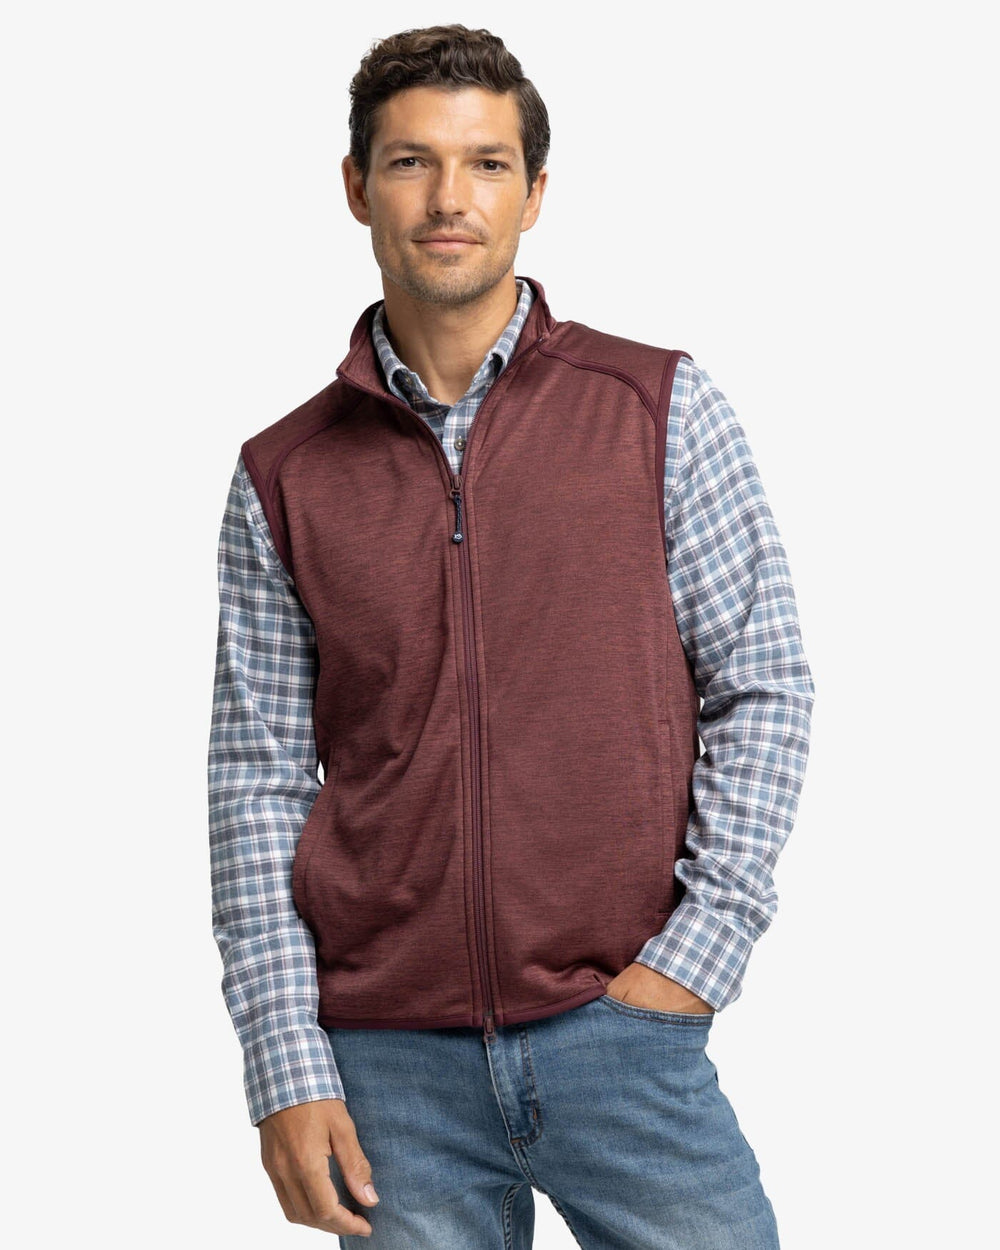 The front view of the Southern Tide Baybrook Heather Vest by Southern Tide - Heather Bordeaux Red